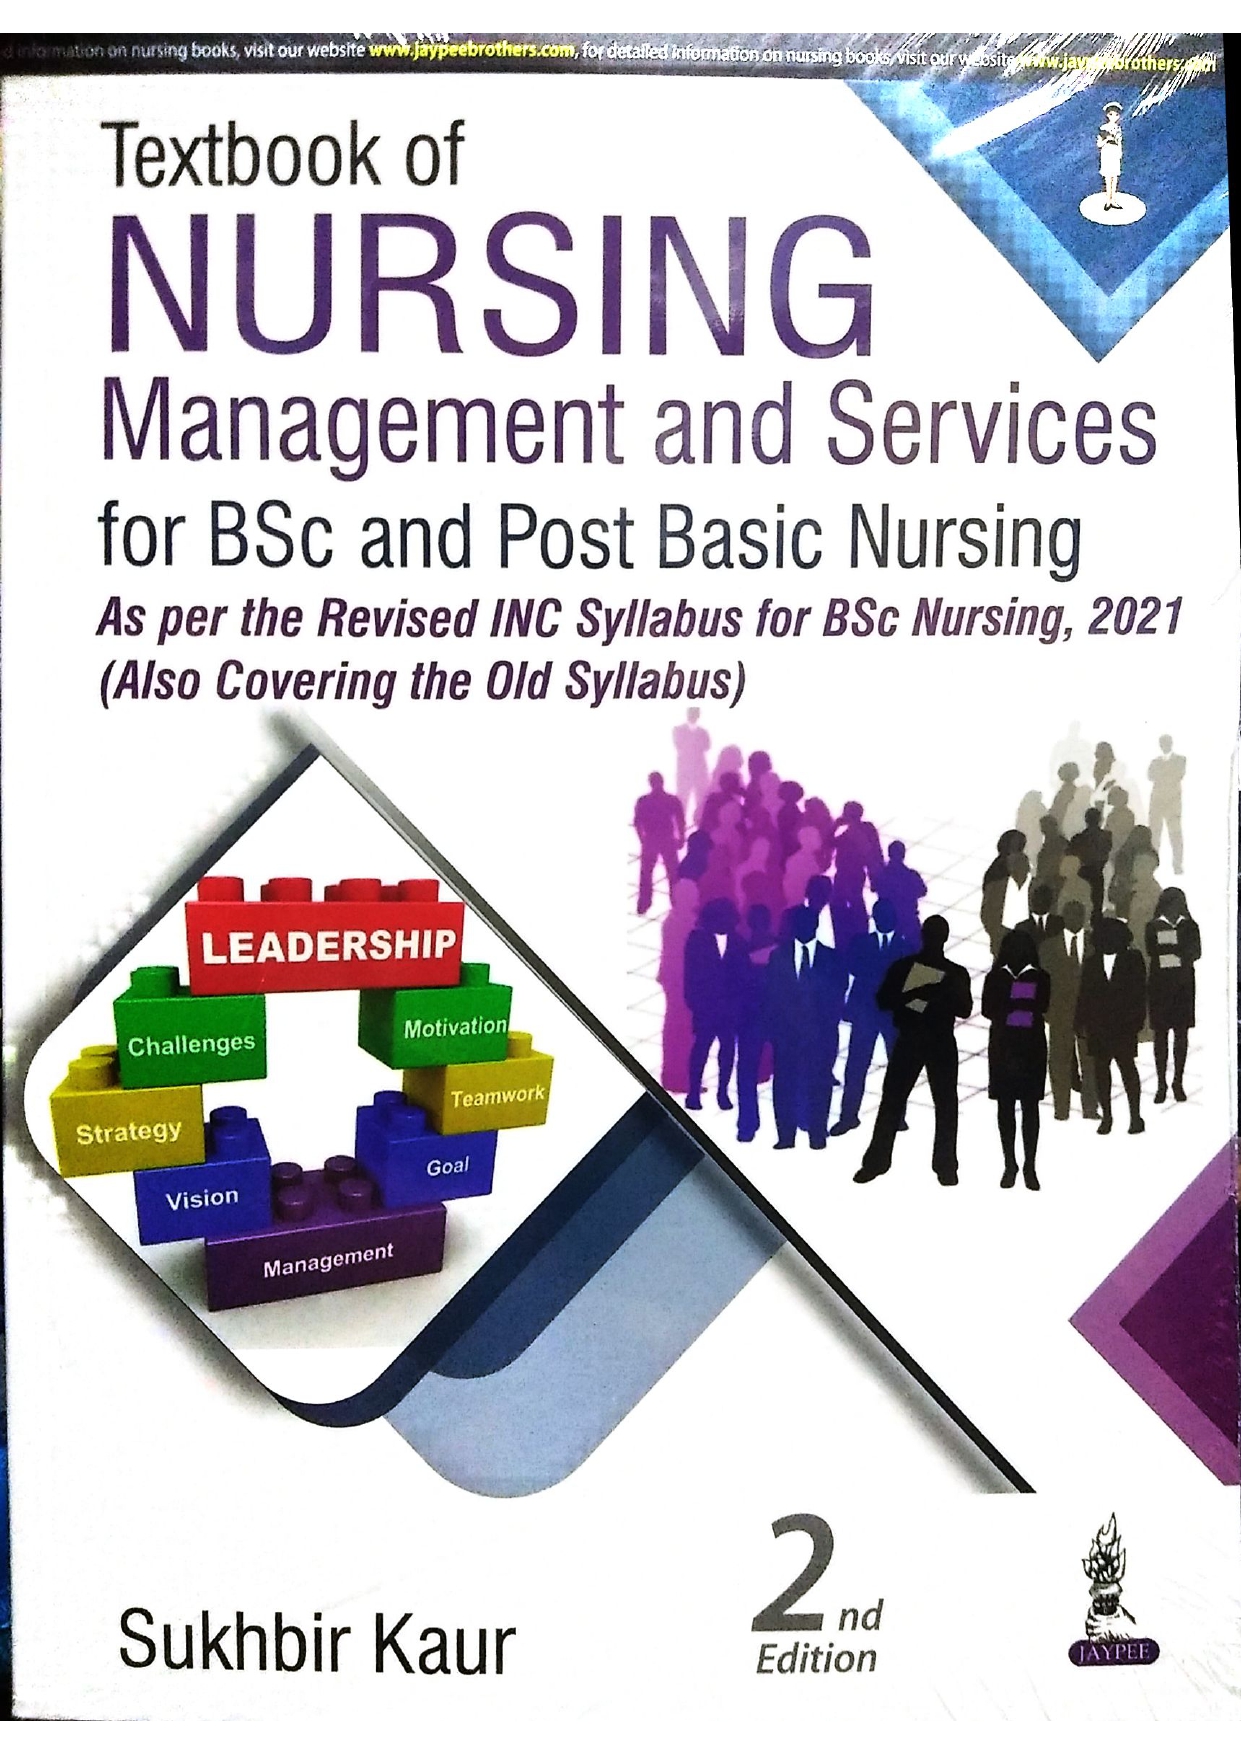 Textbook Of Nursing Management And Services For Bsc And Post Basic Nursing  As Per The Revised Inc Syllabus For Bsc Nursuing ,2021 (Also Covering  The Old Syllabus)